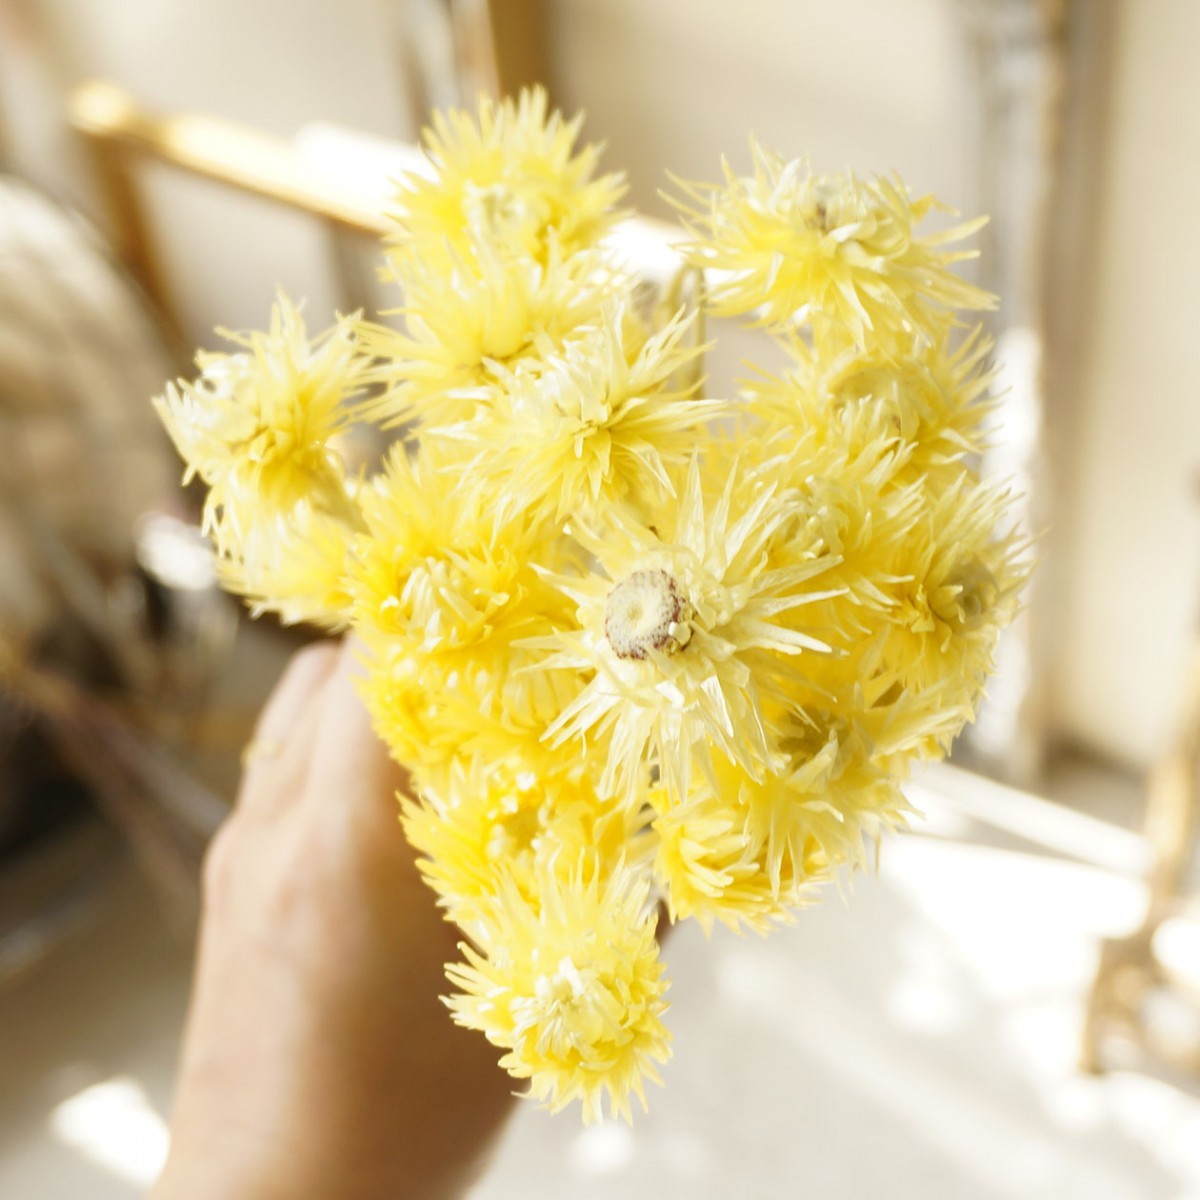  large ground agriculture . dry flower Mini silver daisy all 7 color [ sachet raw materials candle raw materials dry flower arrangement for ] [ Sunday holiday delivery business holiday ]